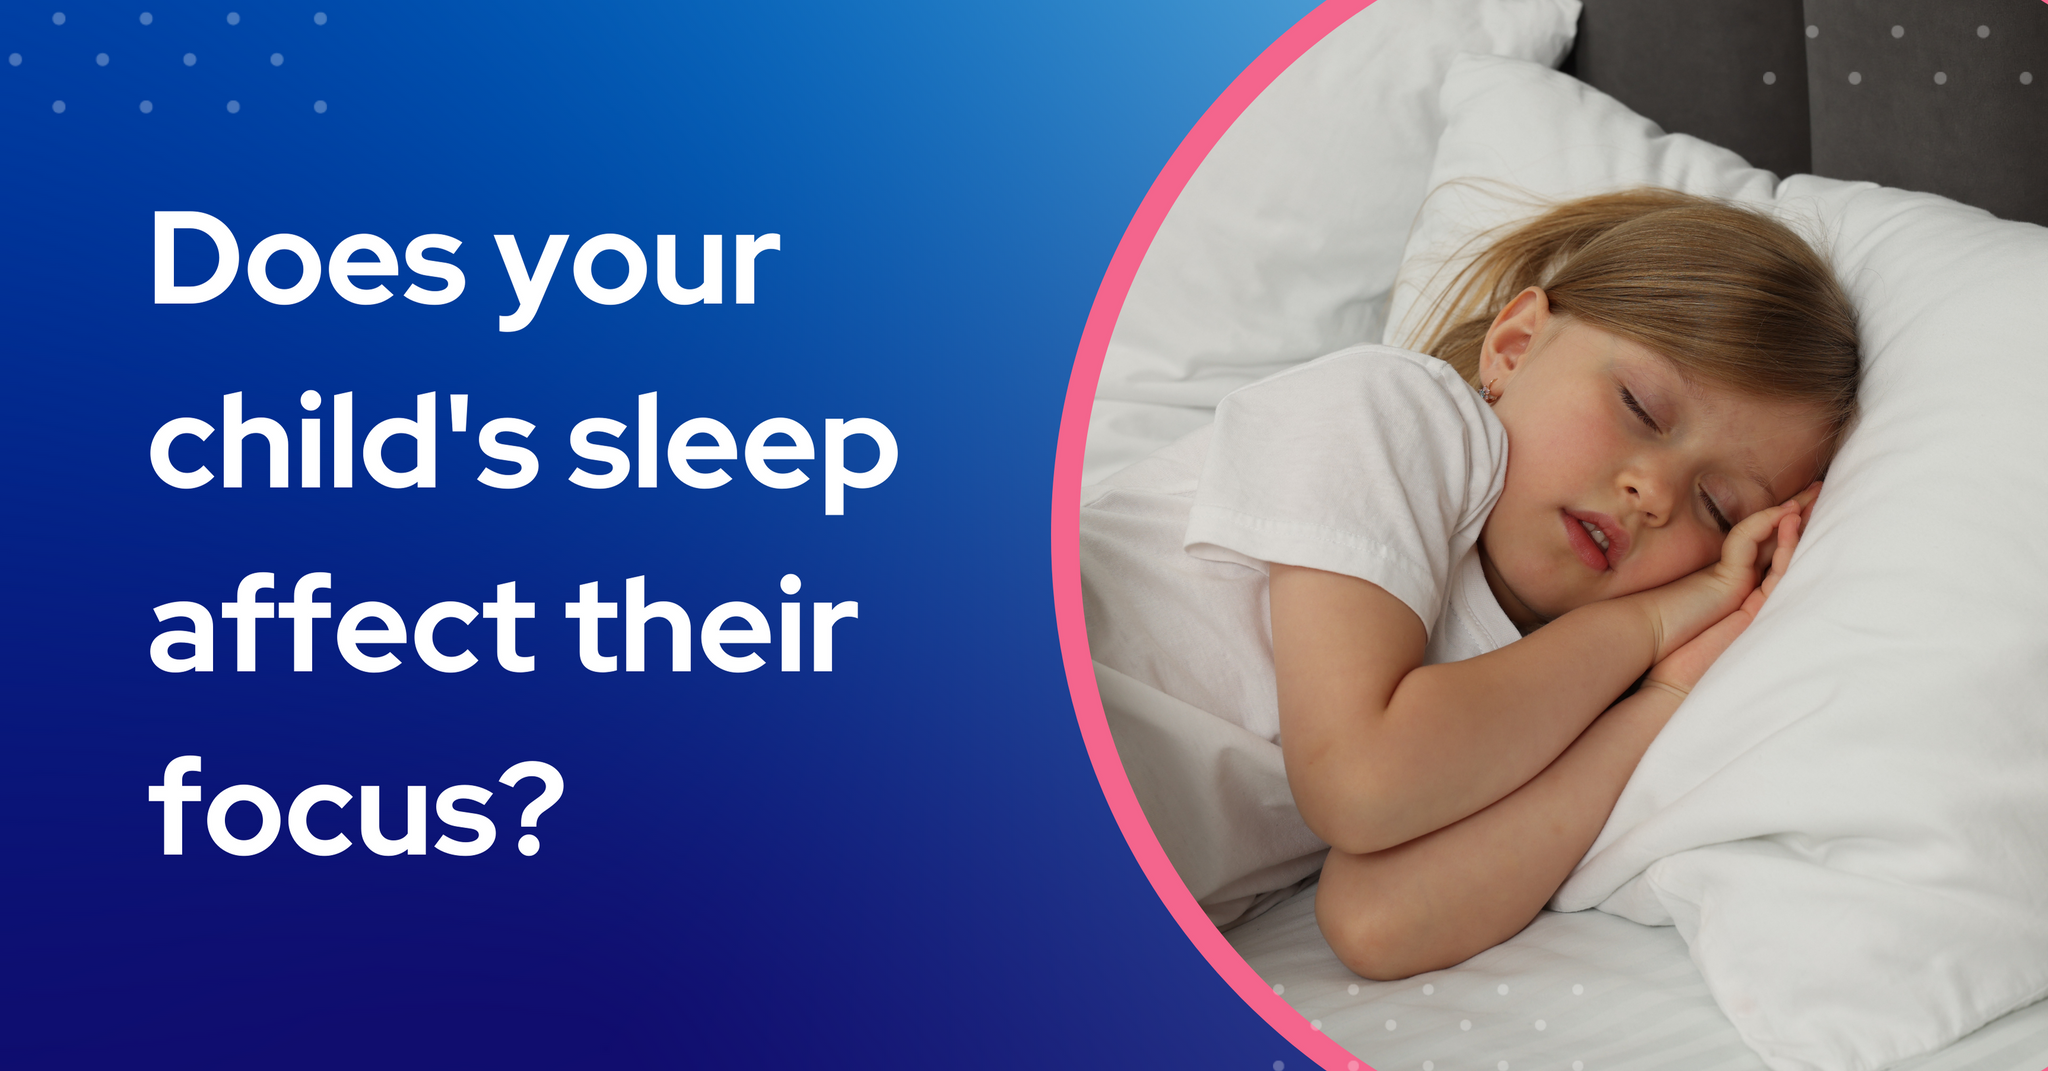 Does Your Child's Sleep Affect Their Focus?